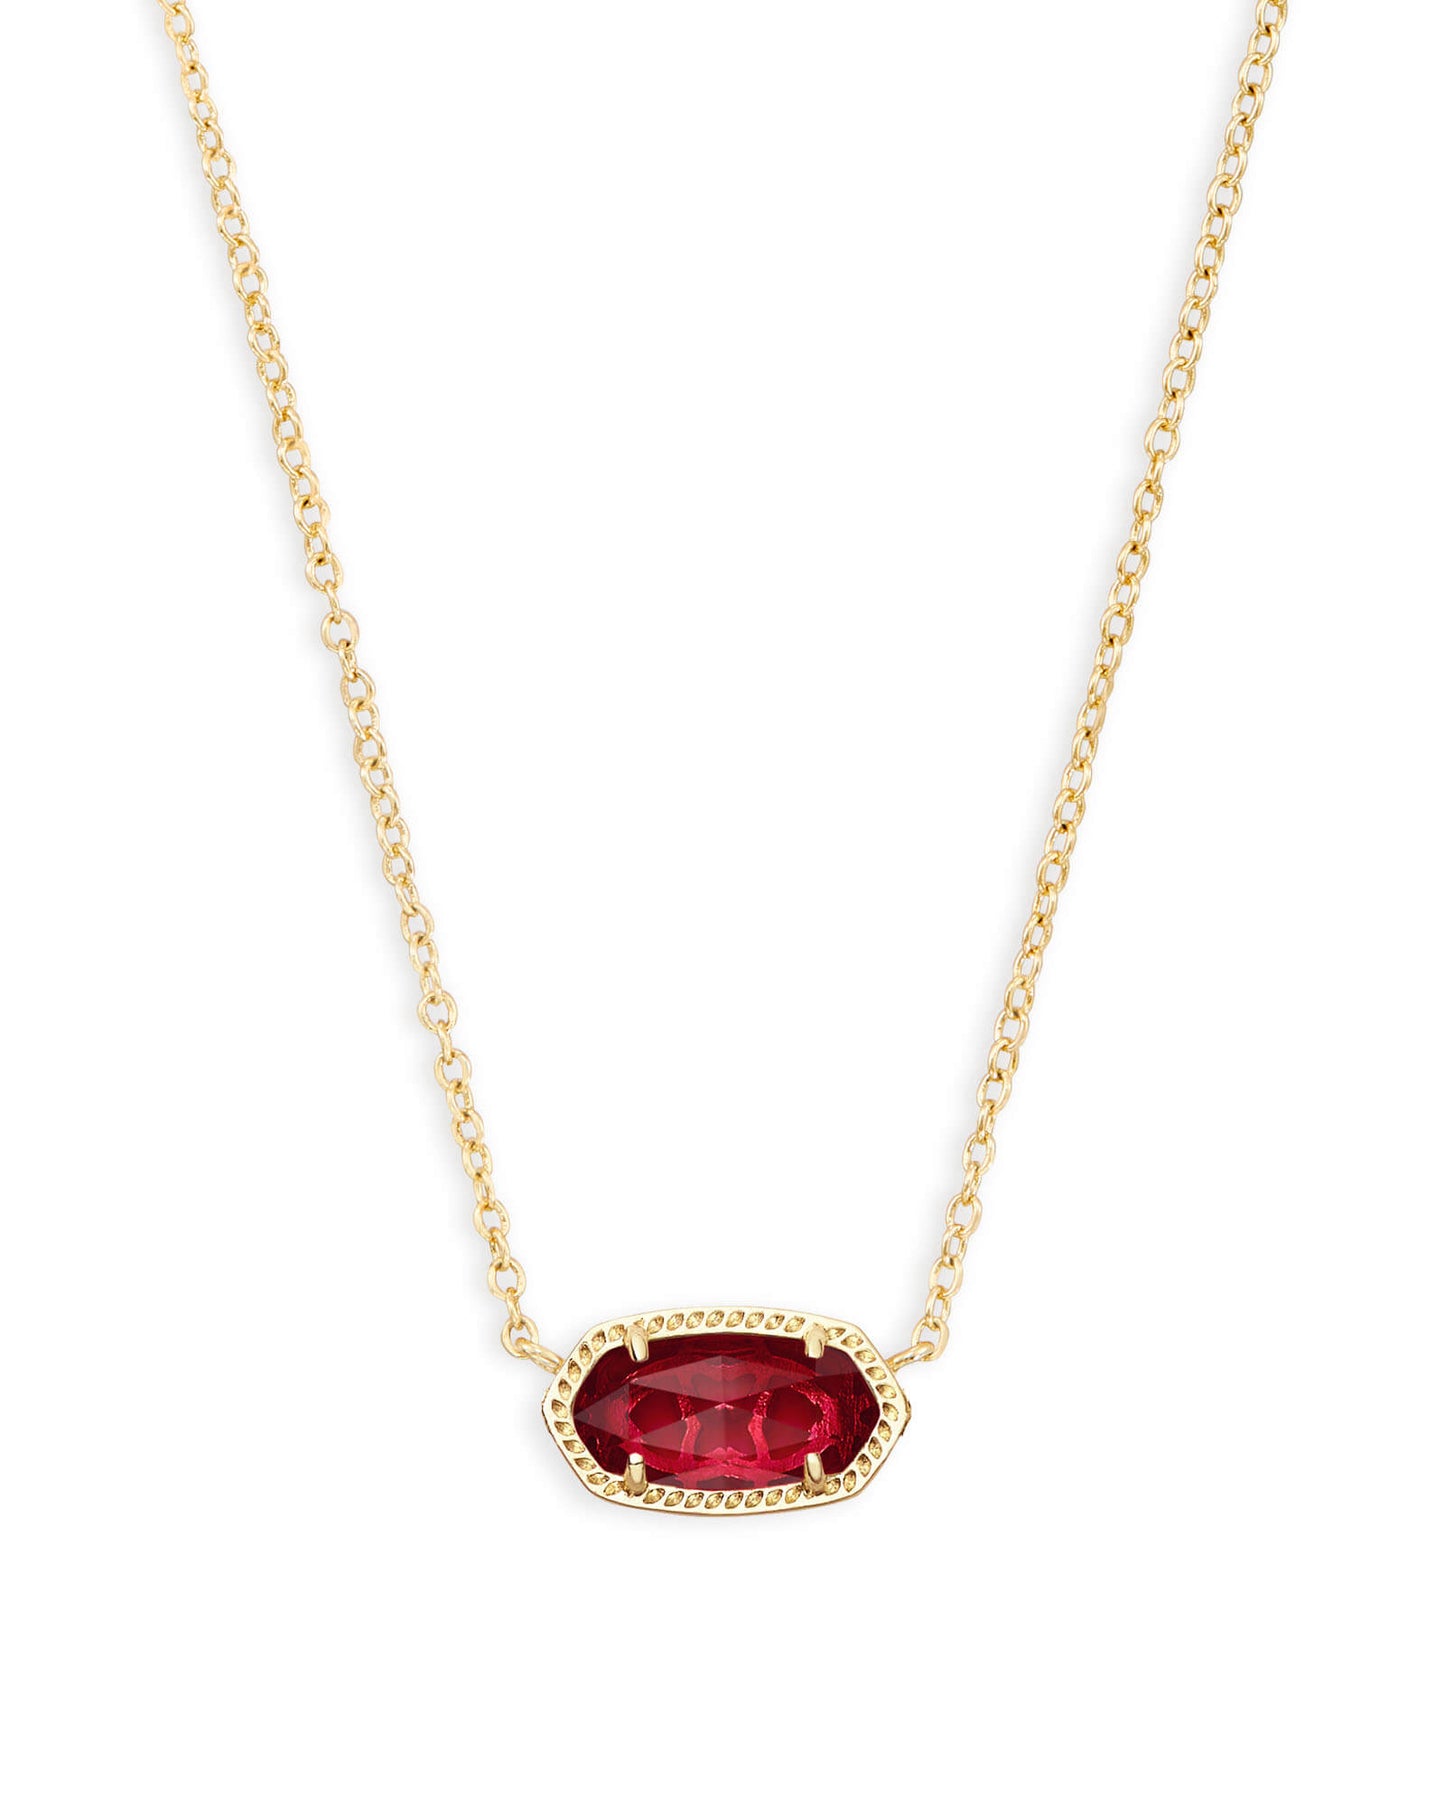 Elisa Gold Pendant Necklace in Berry Glass